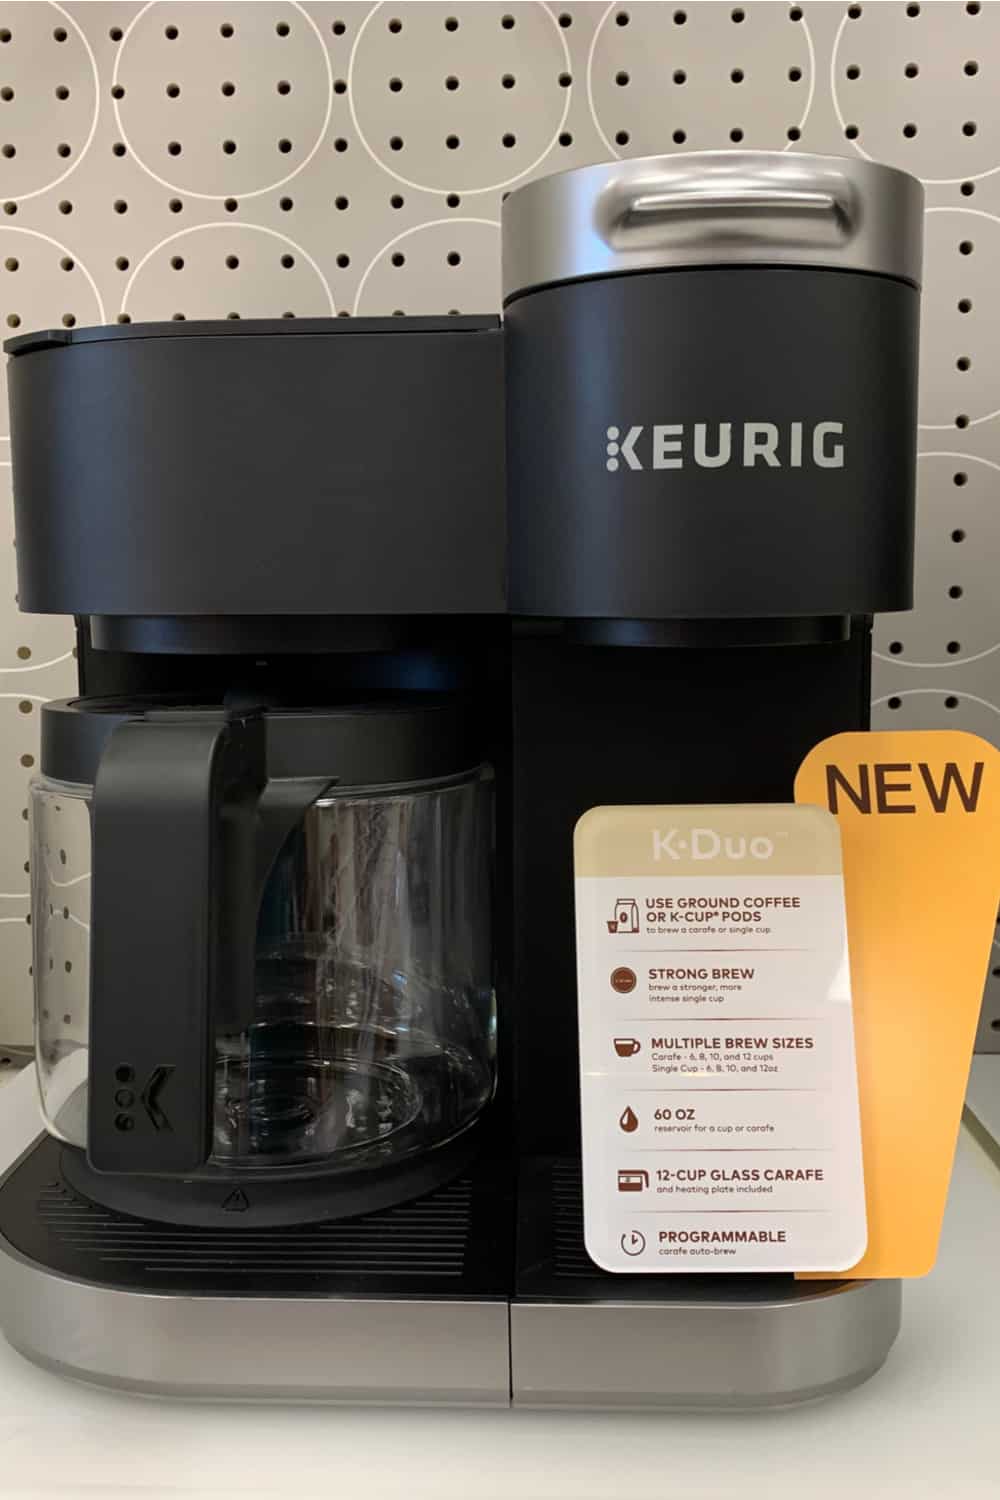 Keurig vs Traditional Coffee Maker What’s the Difference